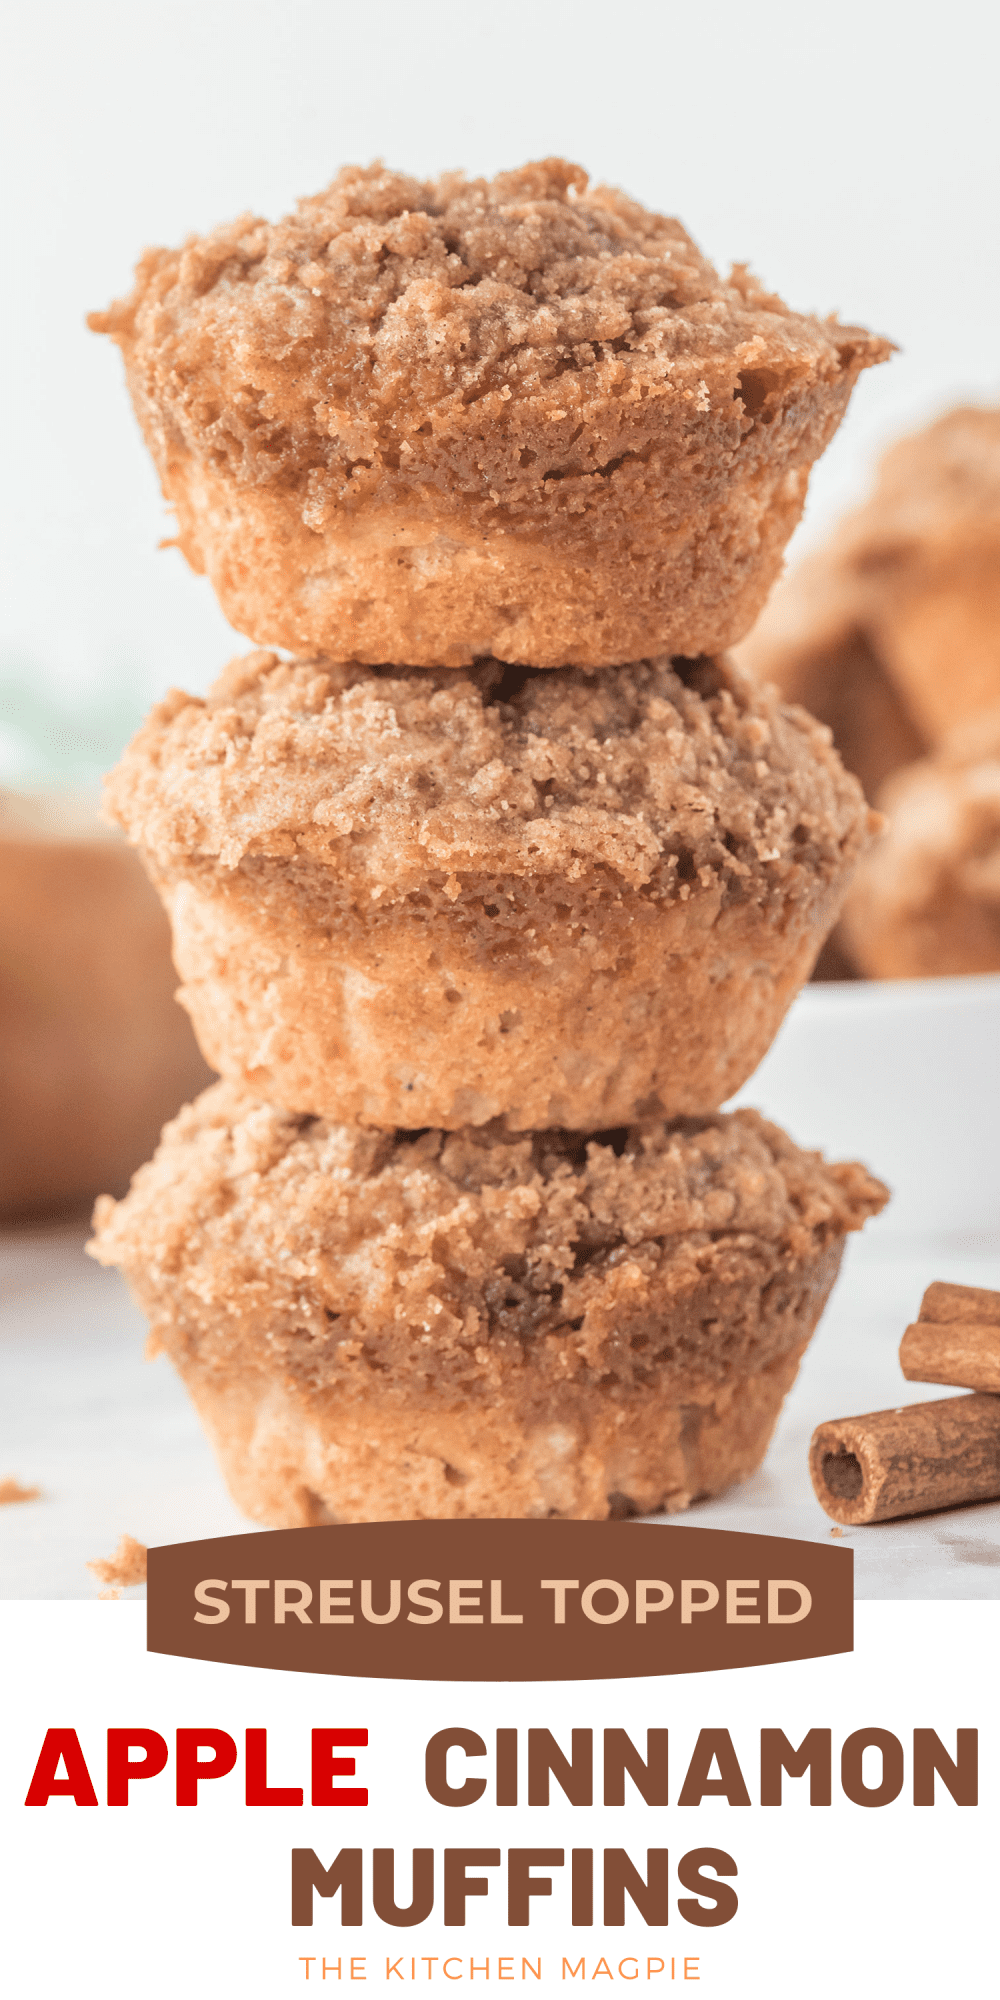 Sweet and spiced apple cinnamon muffins with a decadent streusel topping! The perfect way to use up apples.